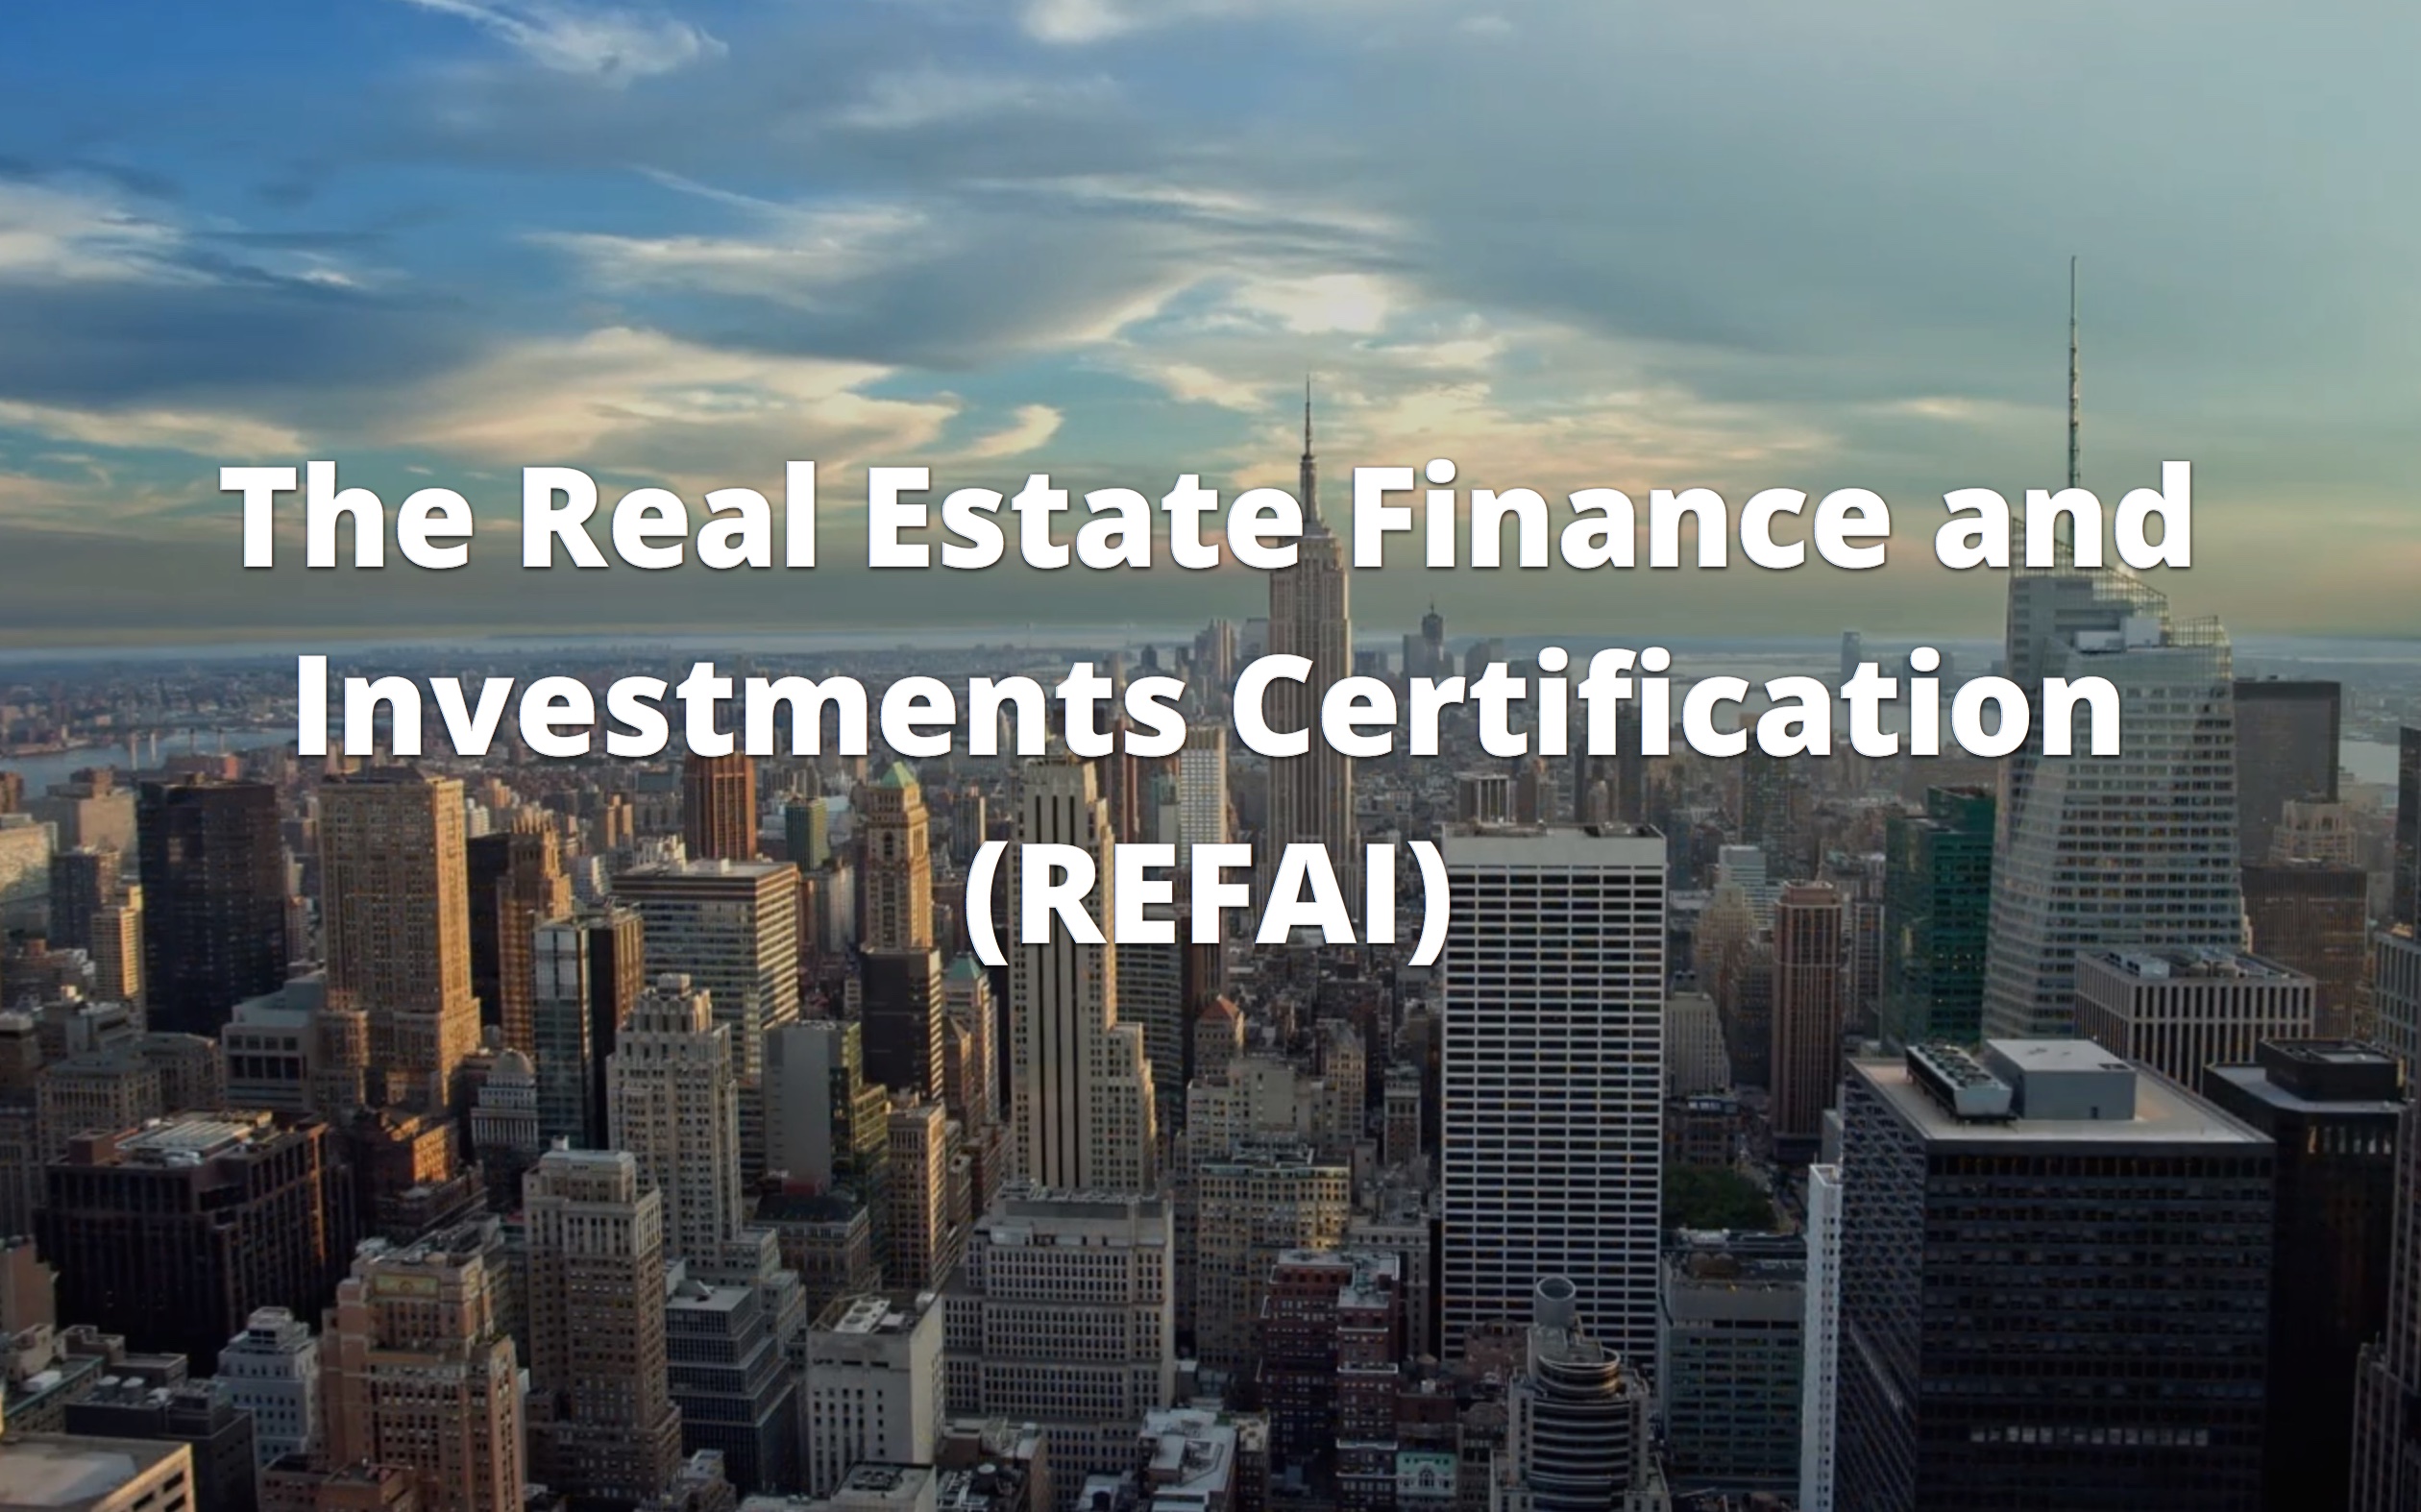 The Real Estate Finance and Investments Certification REFAI Course